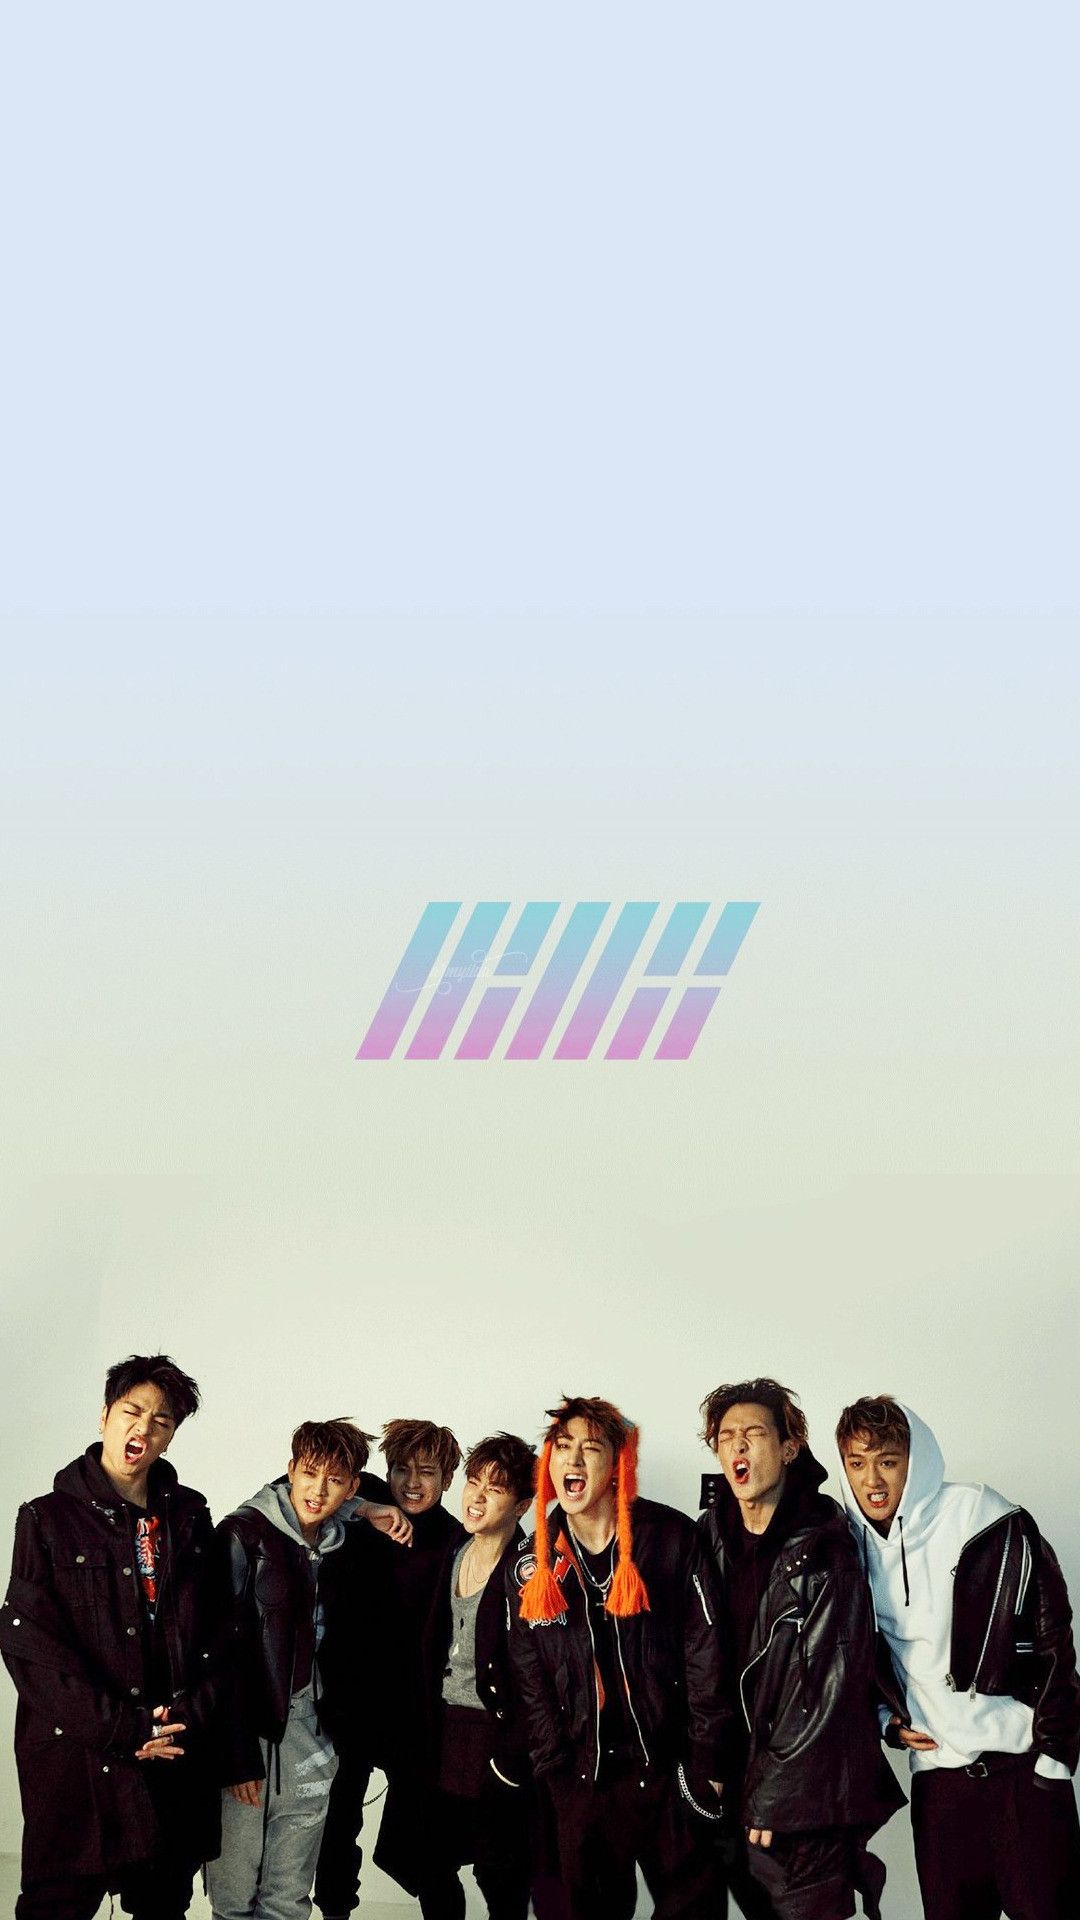 Free download Ikon Wallpaper [1080x1920] for your Desktop, Mobile & Tablet. Explore iKON 2018 Wallpaper. iKON 2018 Wallpaper, Junhoe IKon Wallpaper, Jay IKon Wallpaper